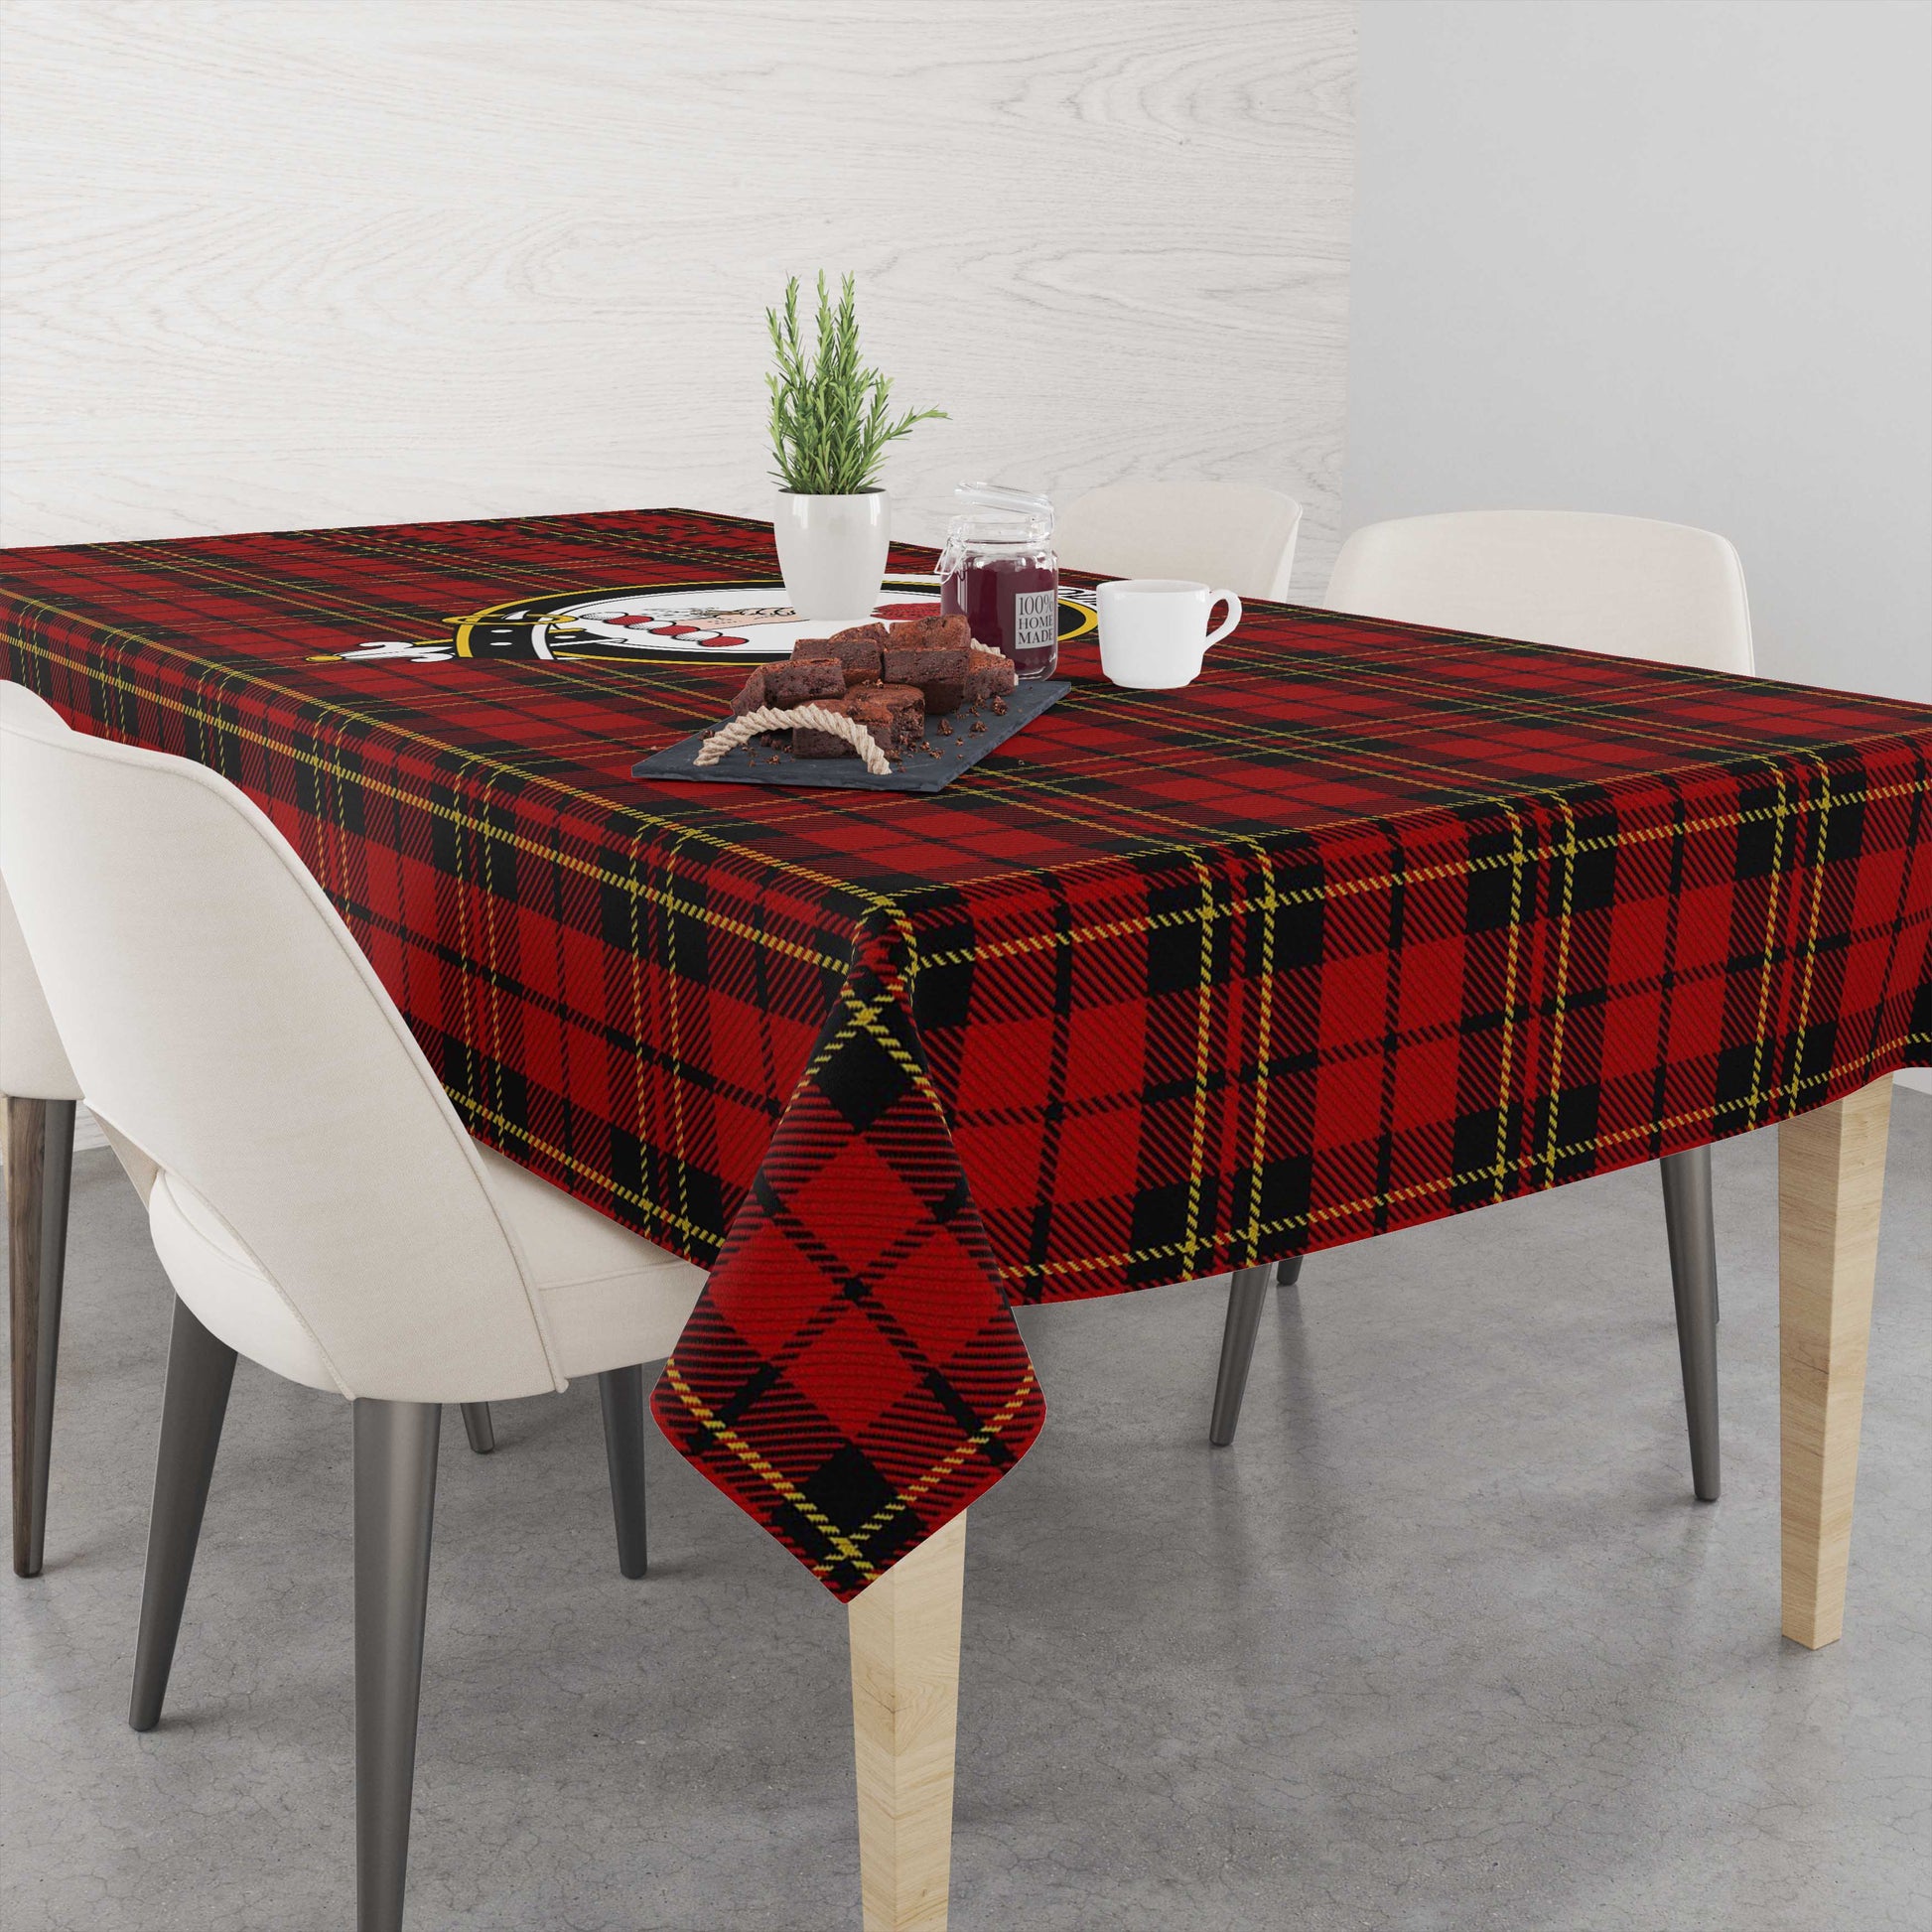 Brodie Tatan Tablecloth with Family Crest - Tartanvibesclothing